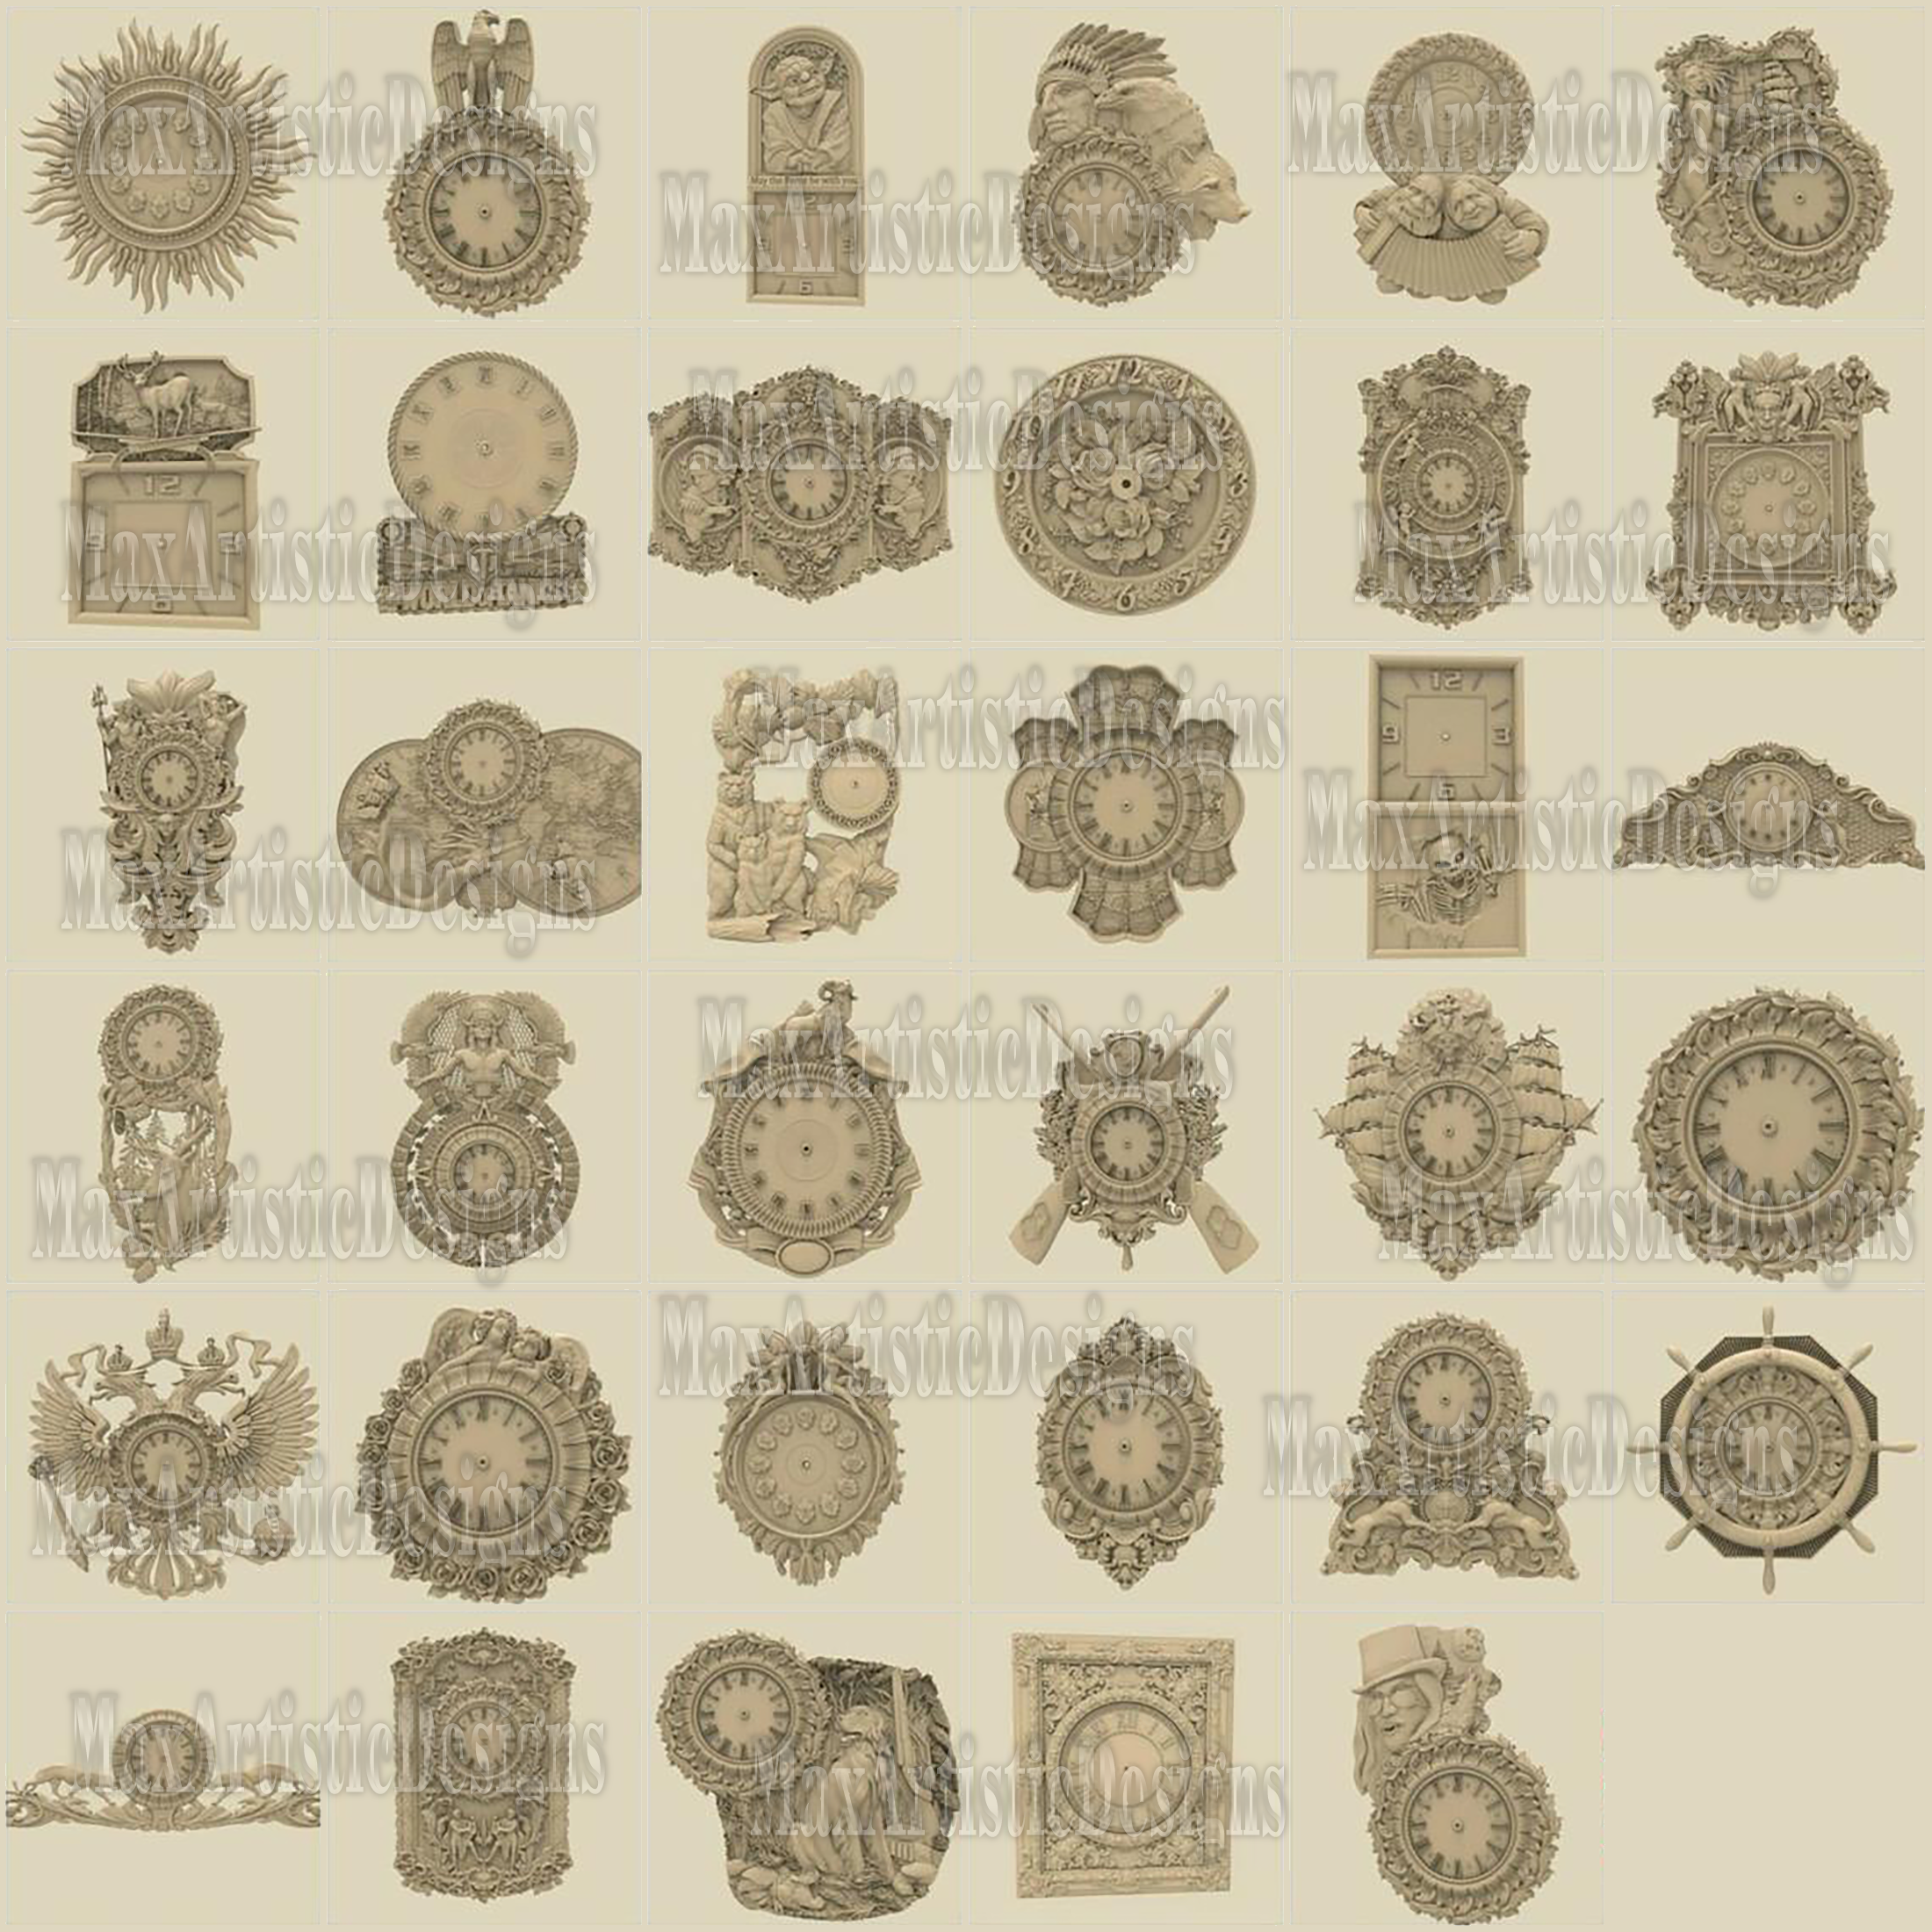 520+ animals 3d stl pack  for basrelief models collection for cnc machine relief artcam aspire cut 3d